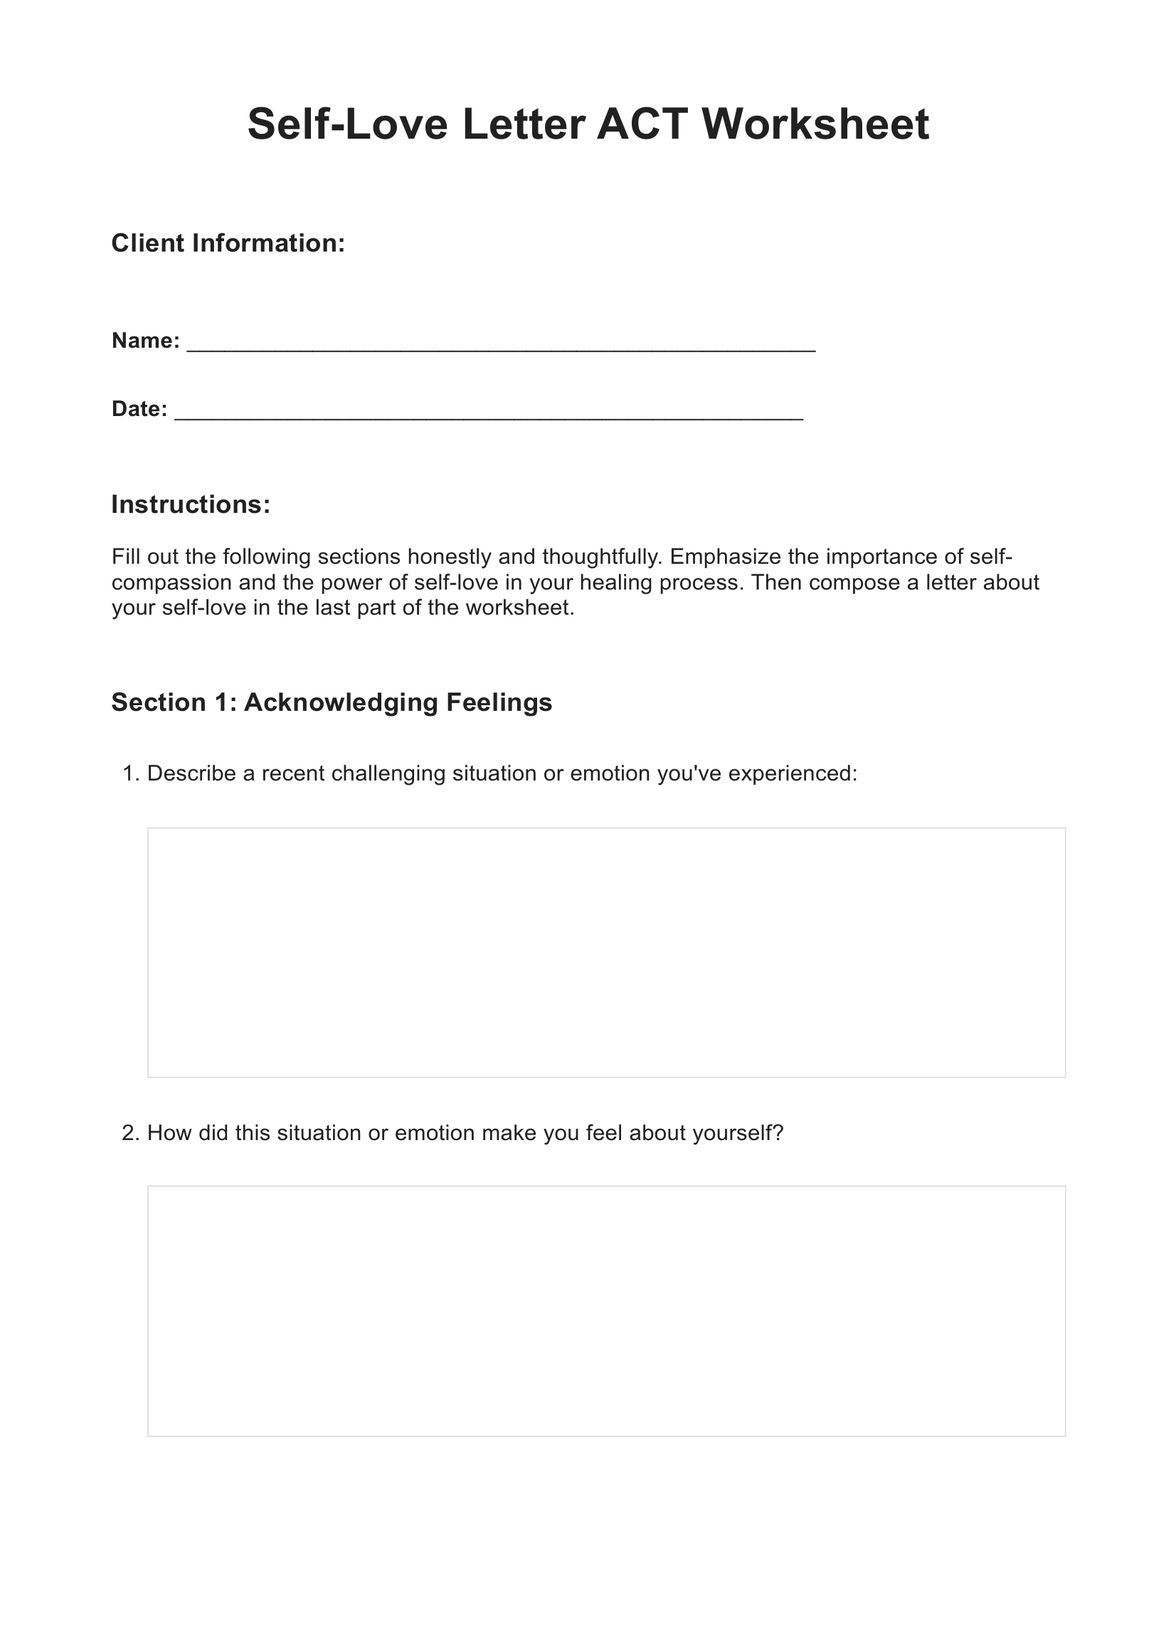 Self-Love Letter ACT Worksheet PDF Example